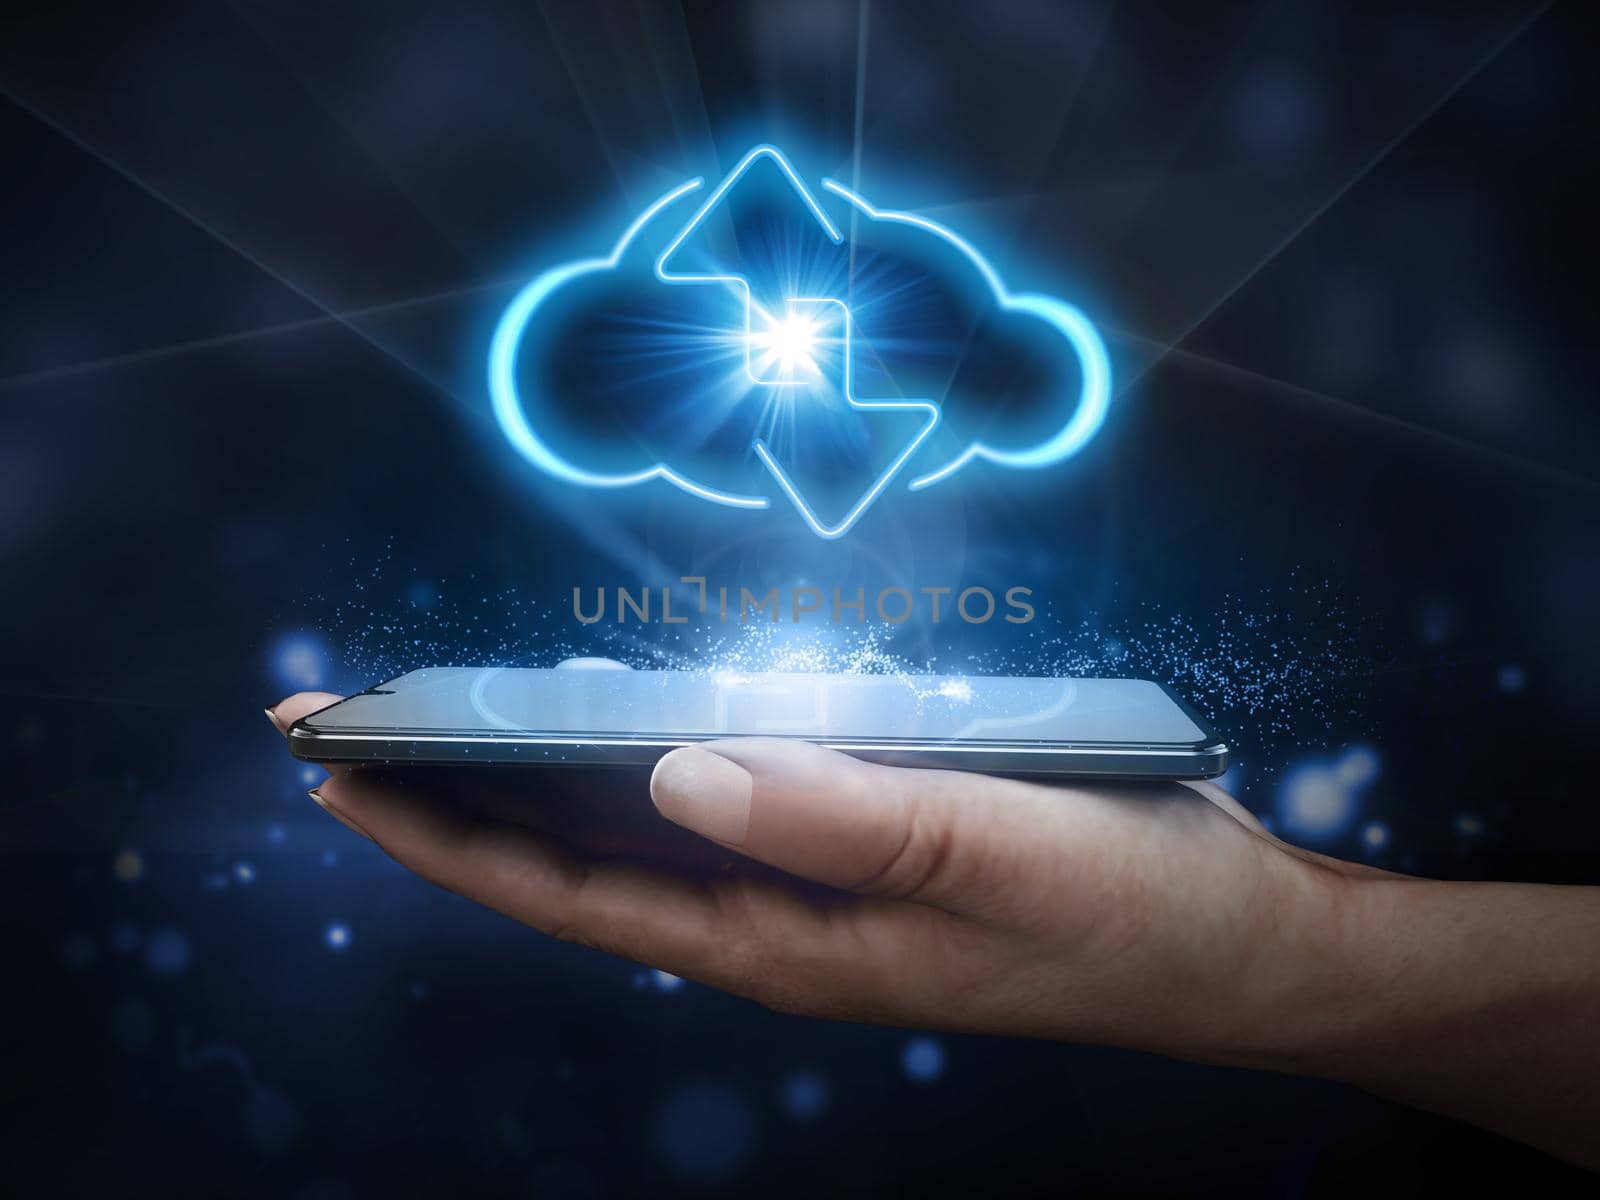 Cloud shape and download upload arrows on smartphone in hand. 3D illustration.